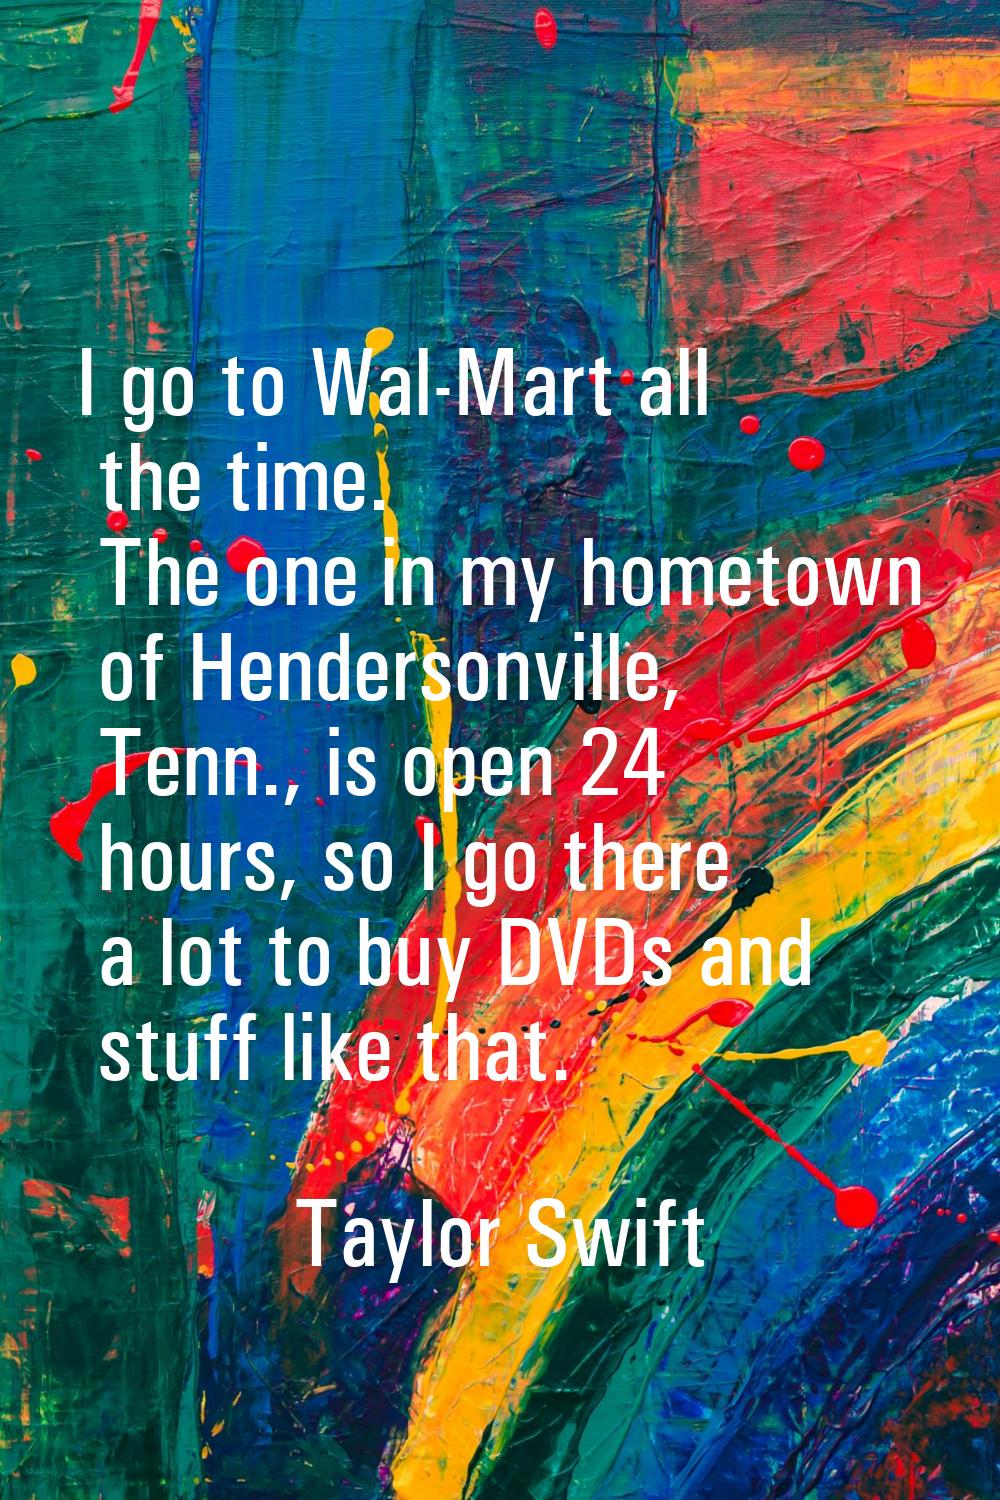 I go to Wal-Mart all the time. The one in my hometown of Hendersonville, Tenn., is open 24 hours, s